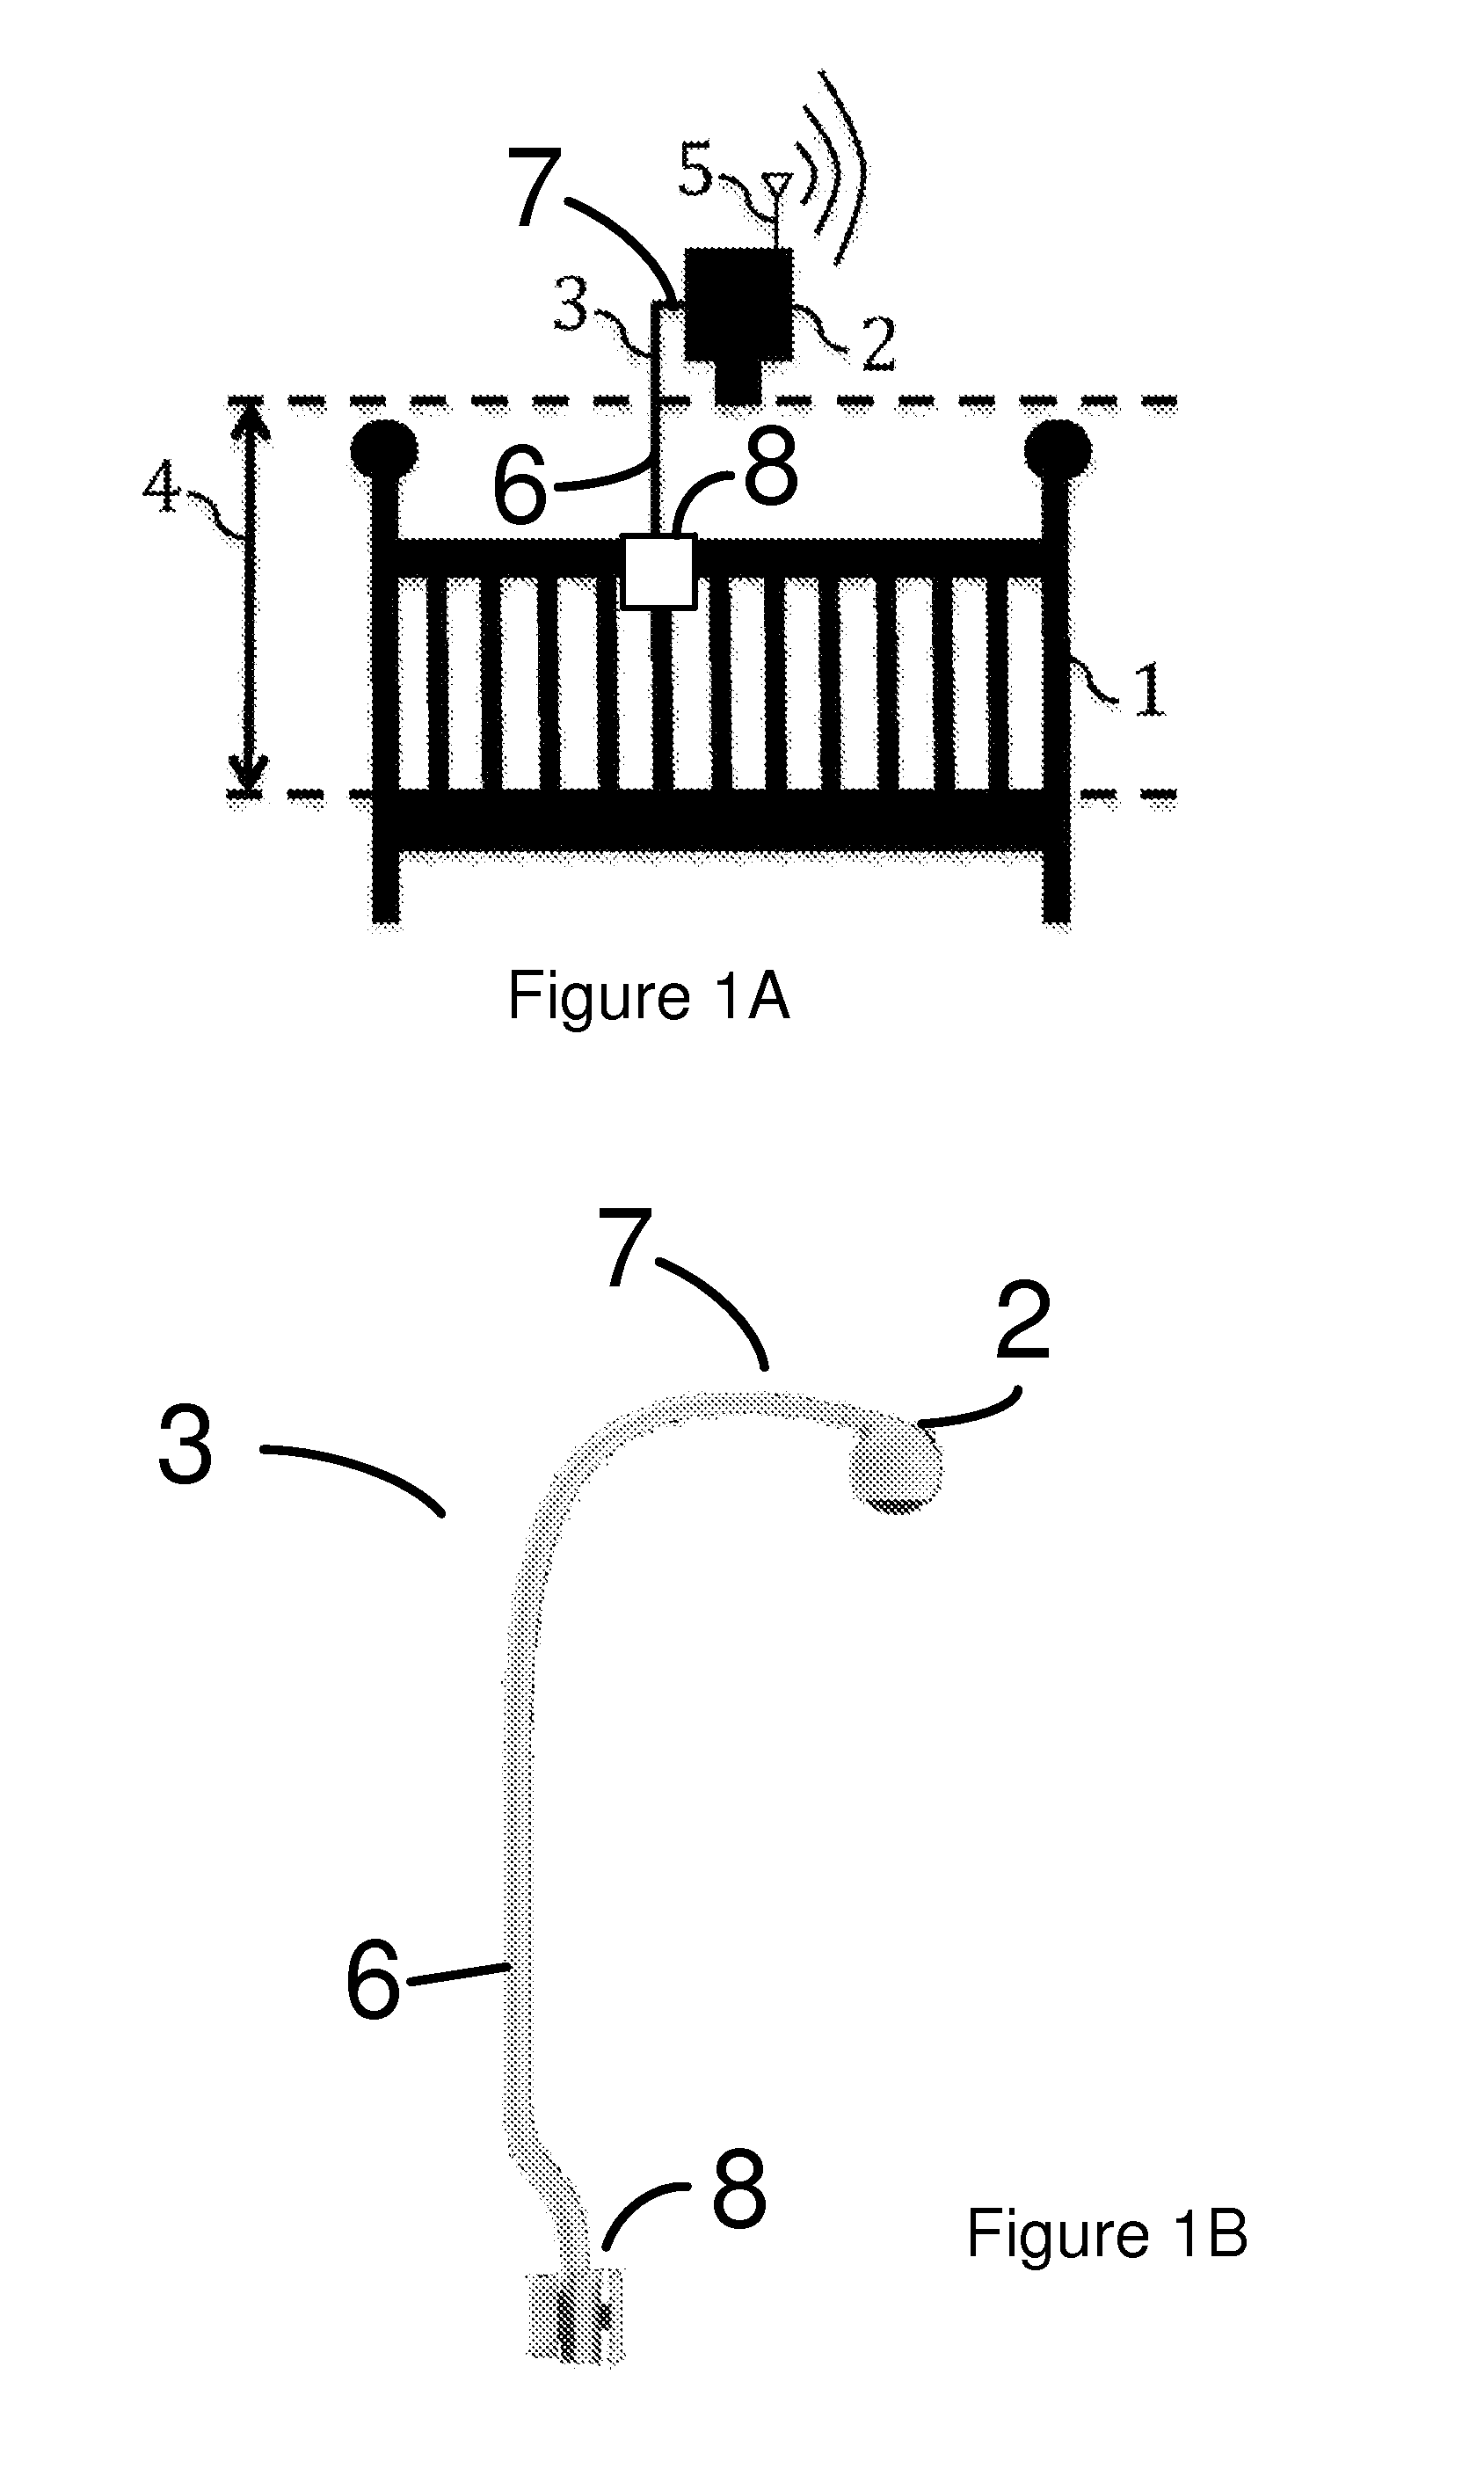 Systems and methods for configuring baby monitor cameras to provide uniform data sets for analysis and to provide an advantageous view point of babies